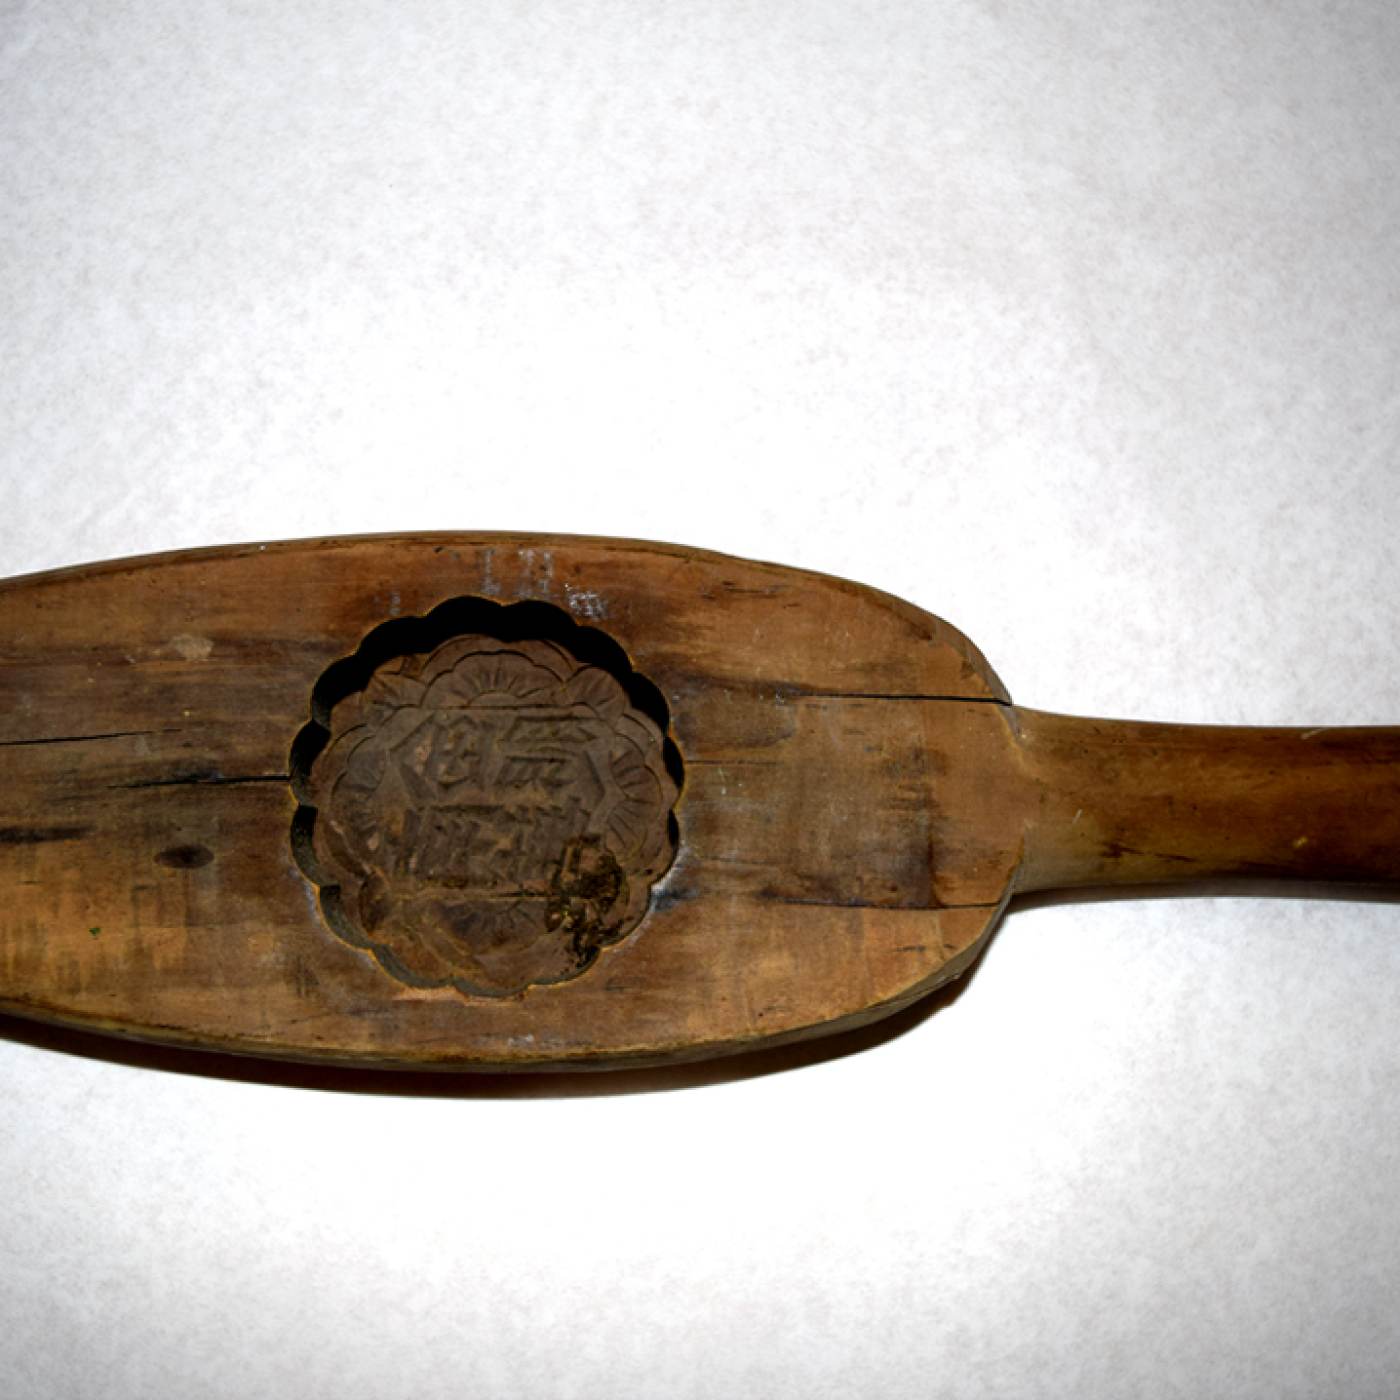 2018.001.001 A wooden mooncake mold that was used at the Nom Wah Bakery at 15 Doyer Street in New York. Courtesy of Wilson Tang, Museum of Chinese in America (MOCA) Collection. 